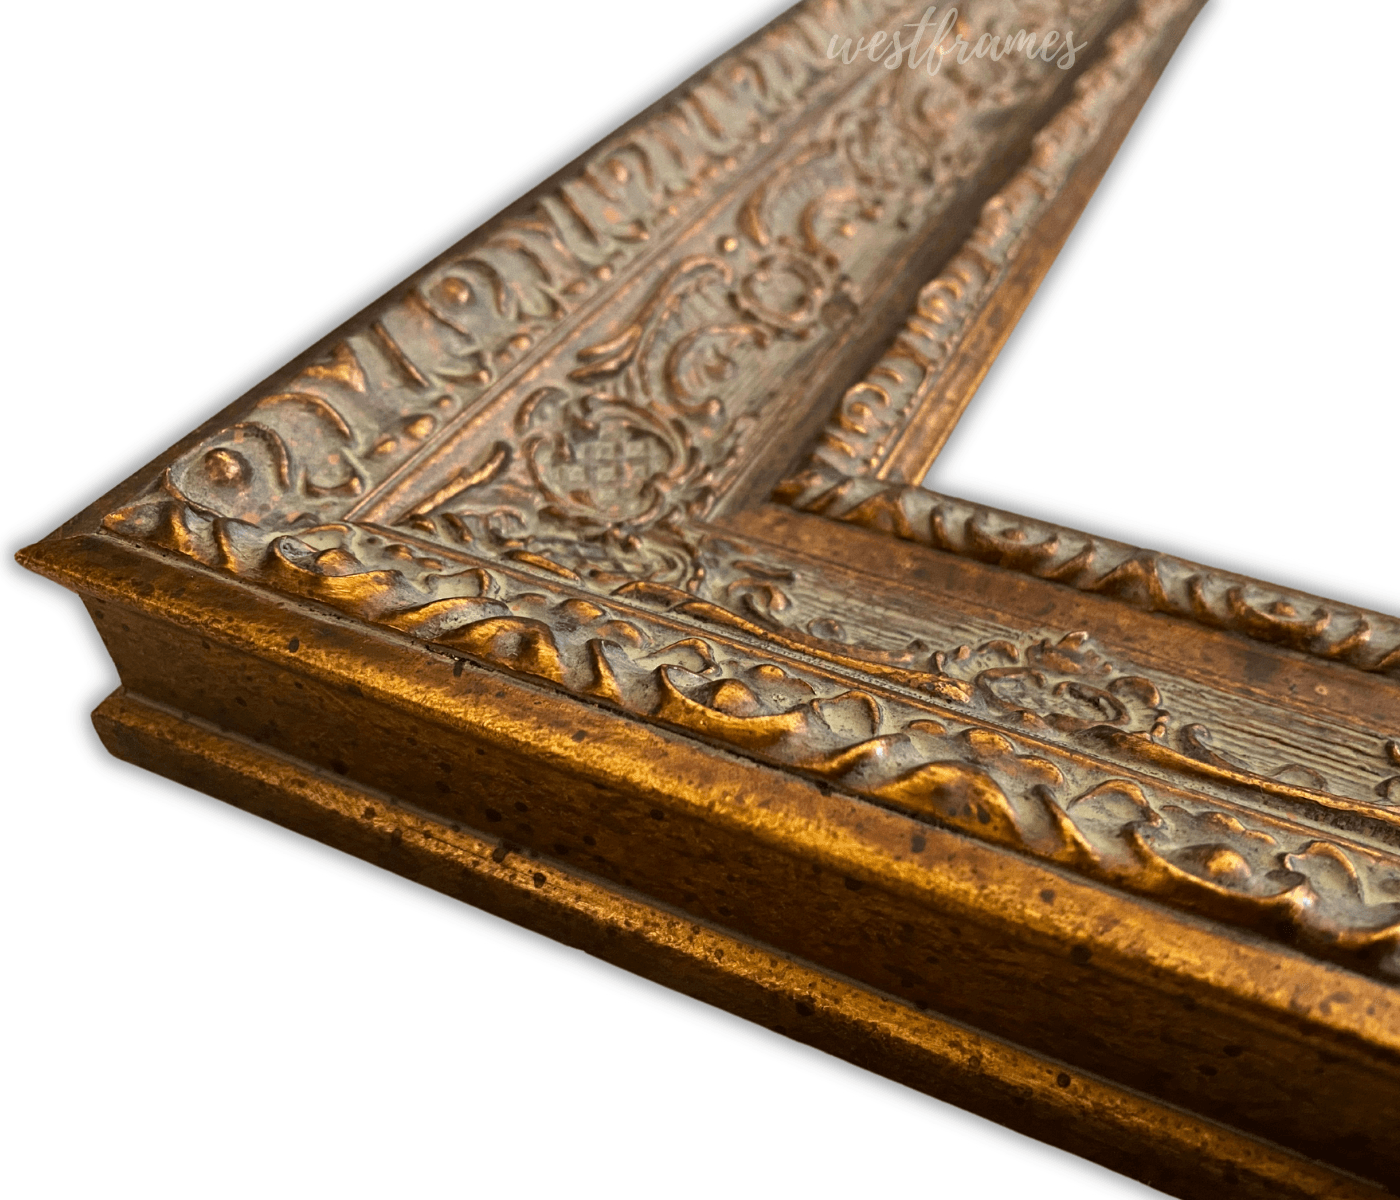 Parisienne Ornate Embossed Wood Picture Frame Antique Gold Patina Finish 3" Wide - West Frames